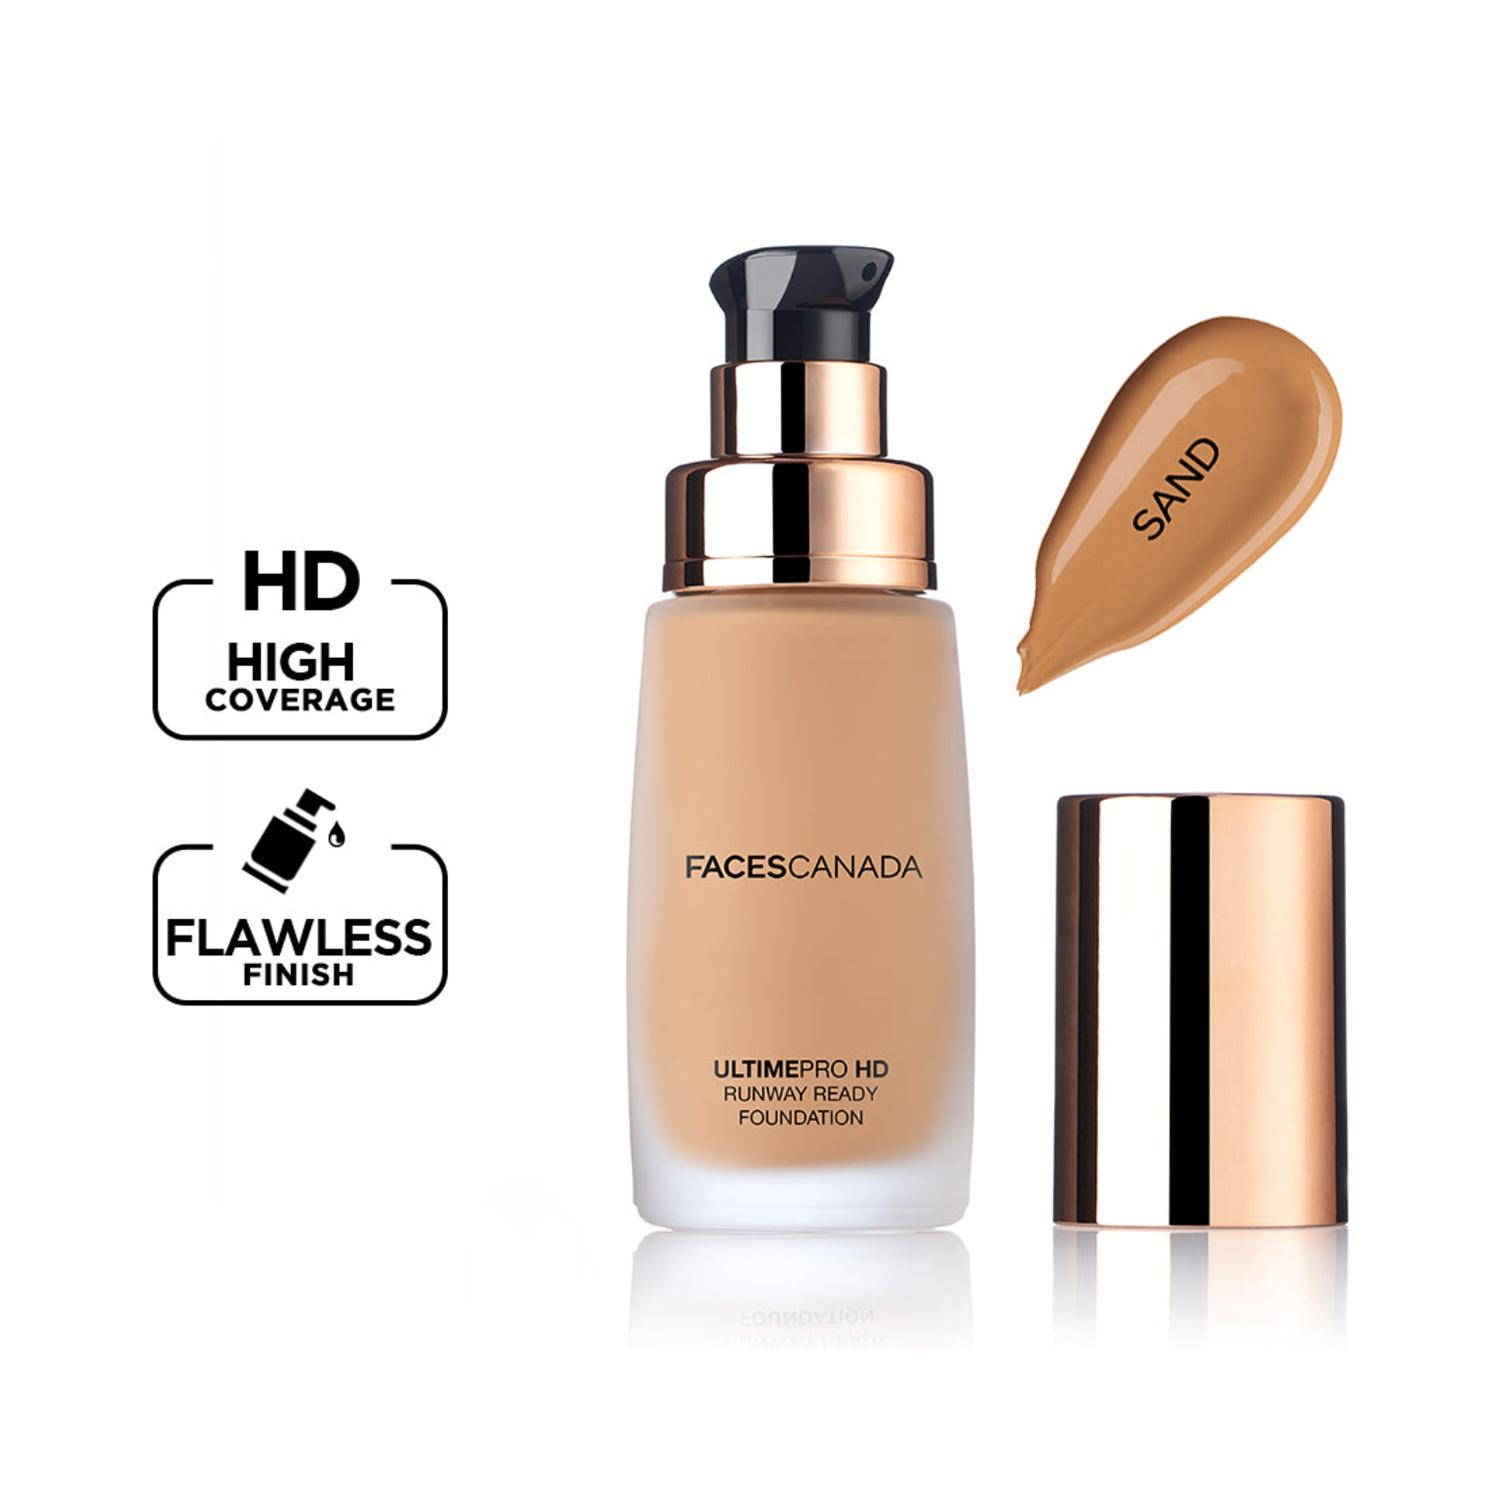 Faces Canada | Faces Canada Ultime Pro HD Runway Ready Foundation - Sand, Radiant Flawless Finish (30 ml)